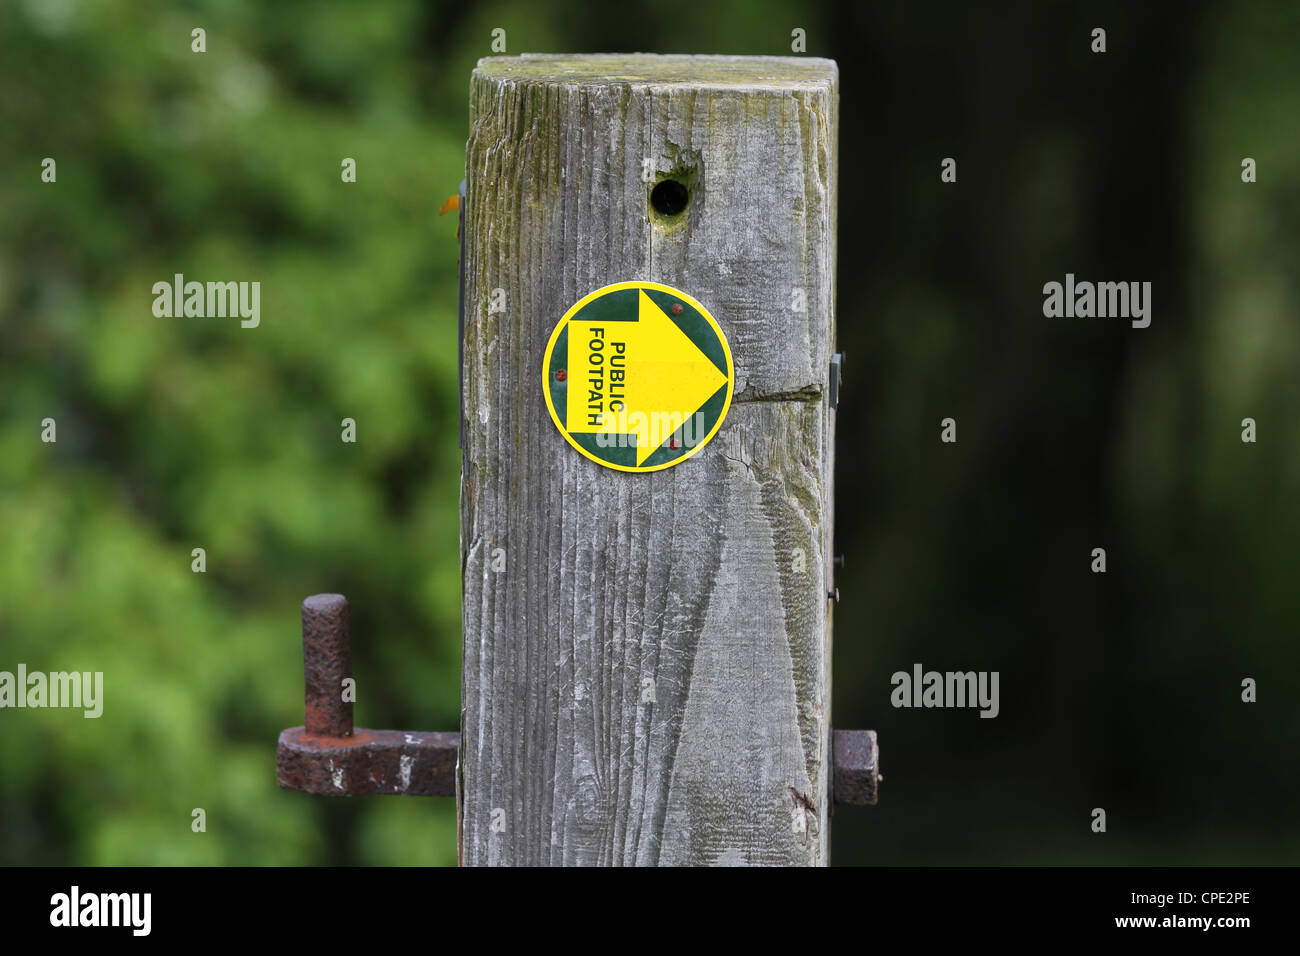 Public Footpath Sign on a Wooden Post Stock Photo